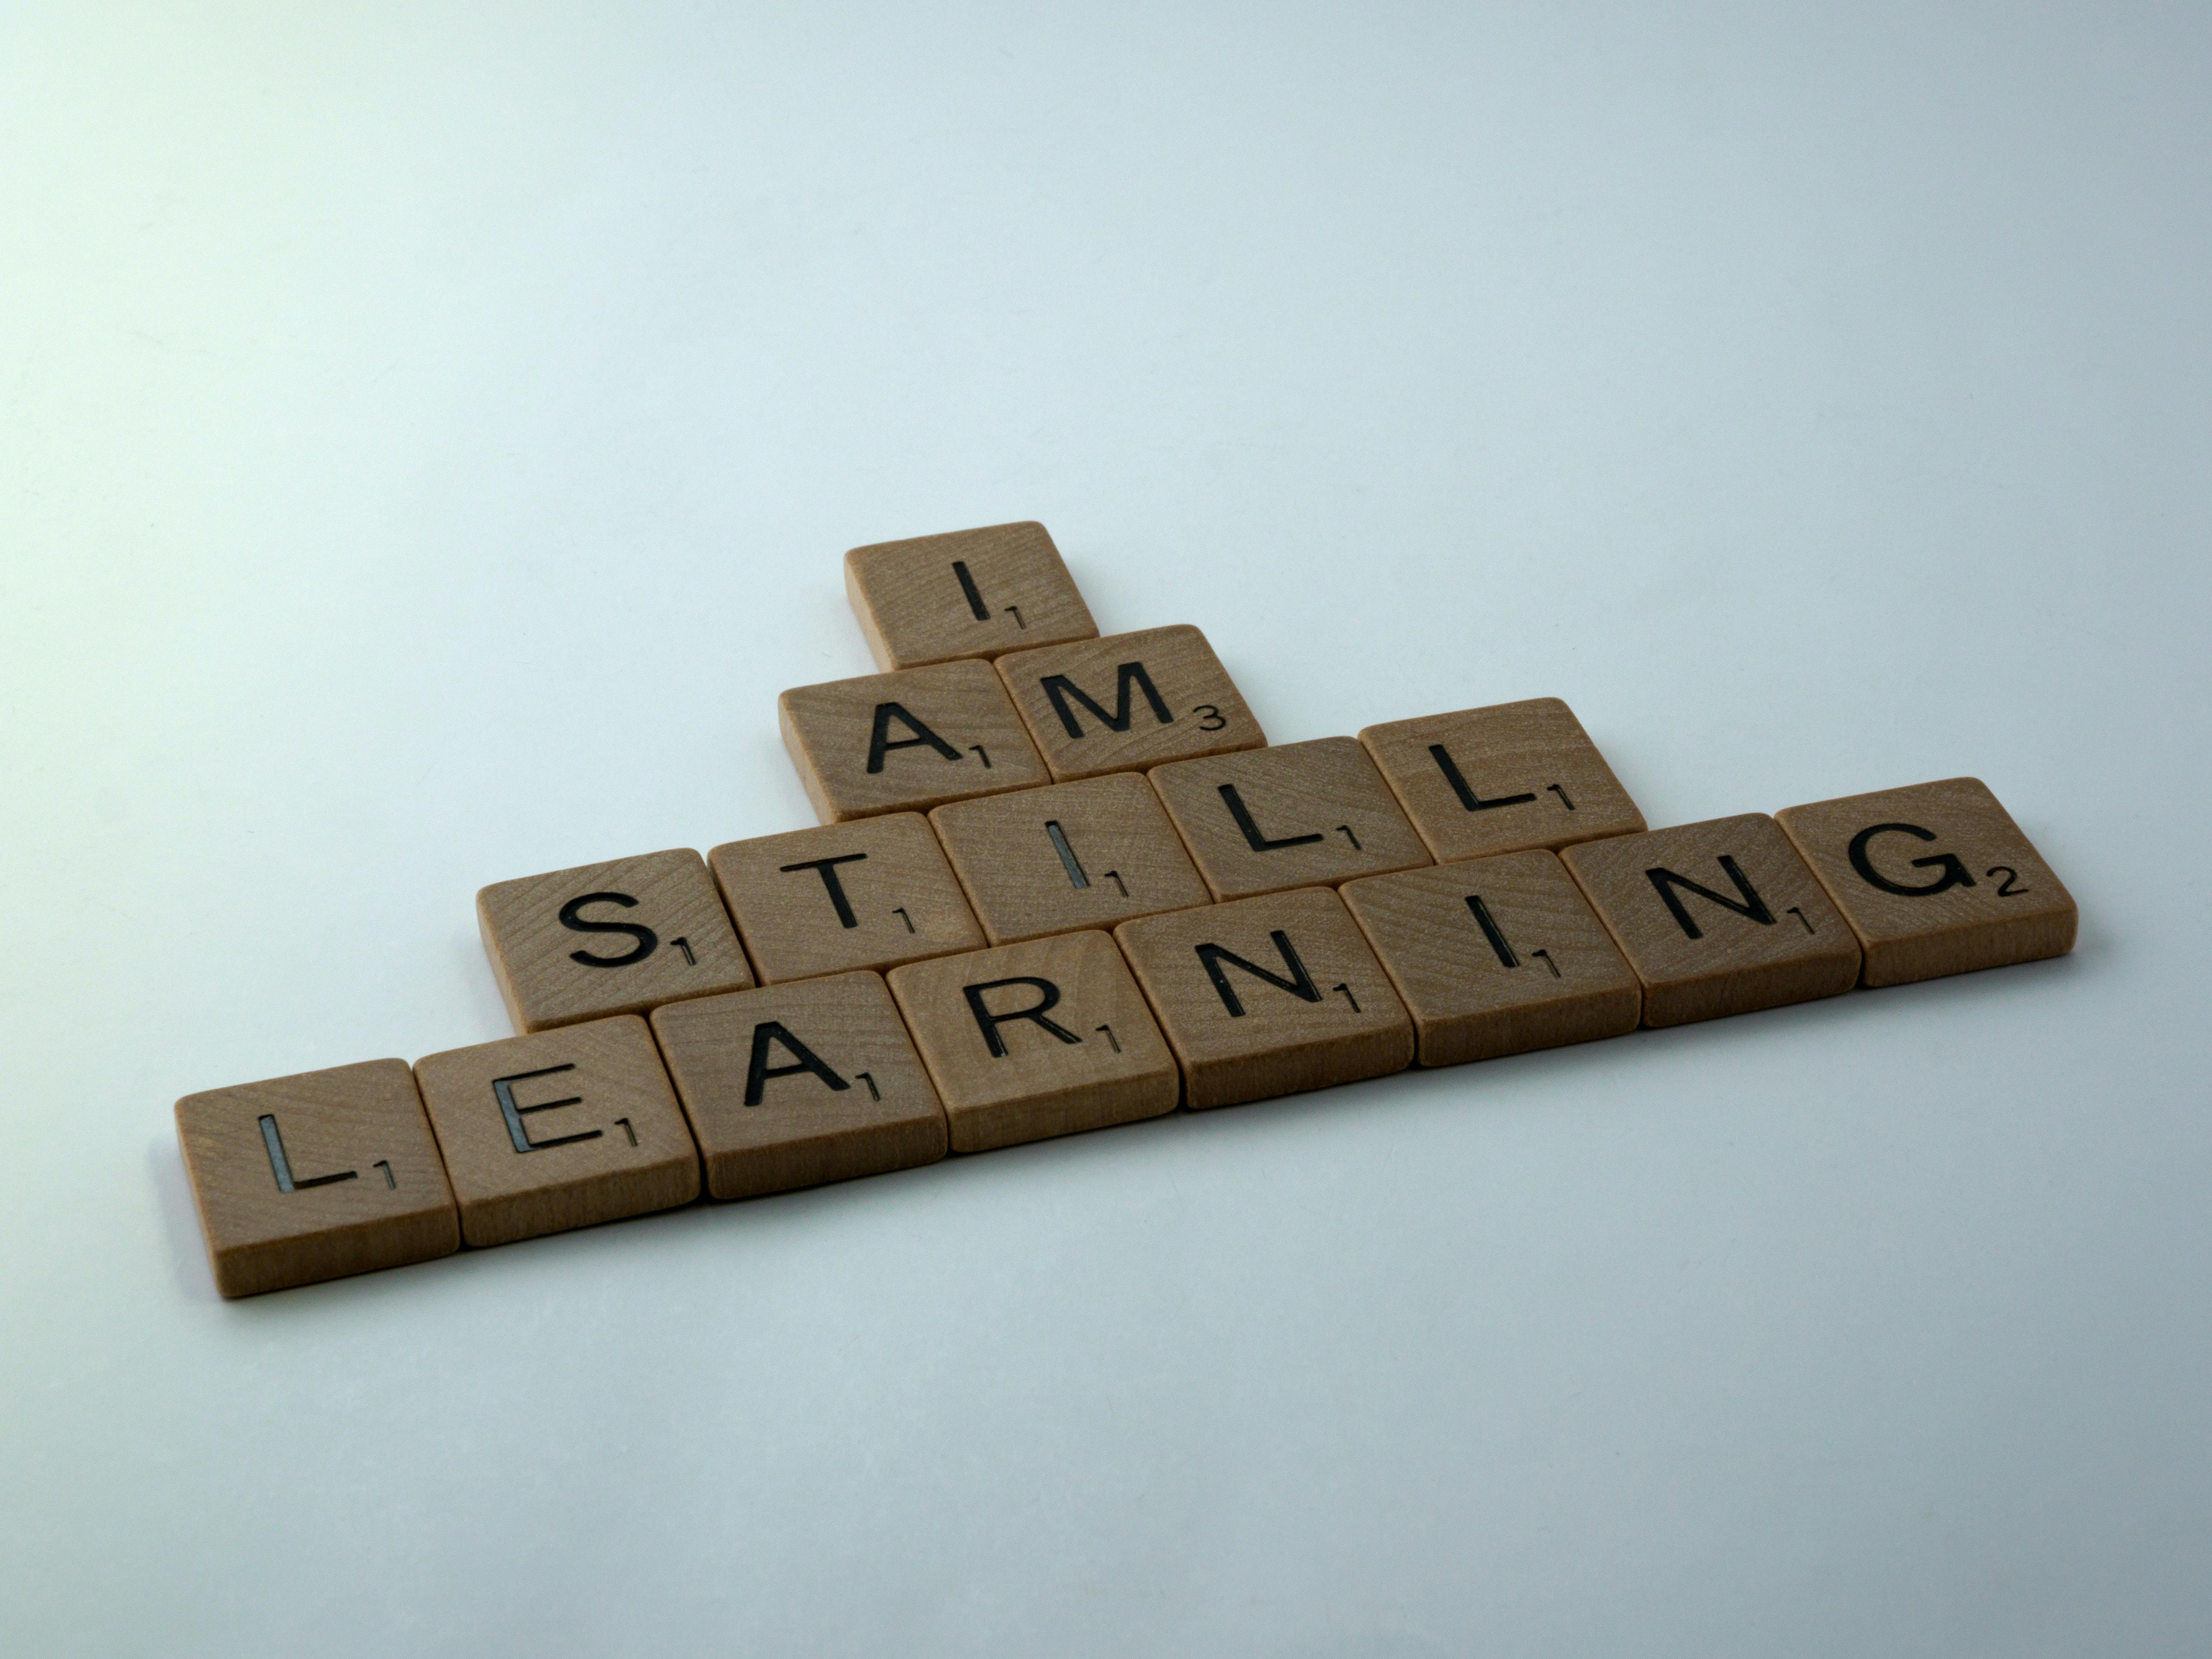 scrabble titles that spell out "I am still learning"